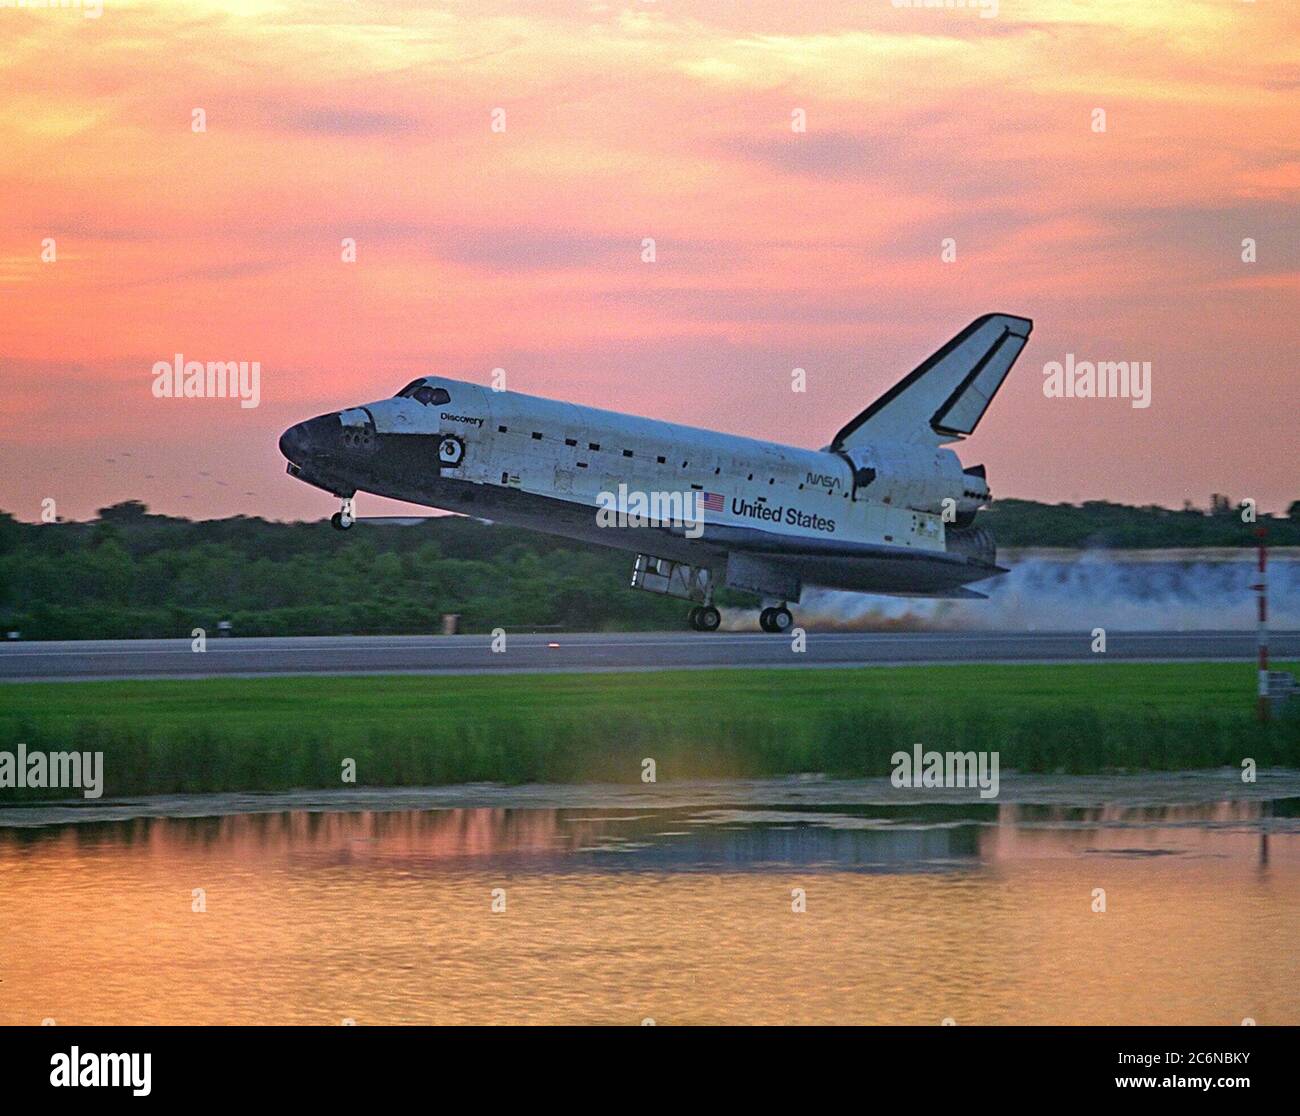 KENNEDY SPACE CENTER, FLA. -- With Commander Curtis L. Brown, Jr. and Pilot Kent V. Rominger at the controls, the Space Shuttle orbiter Discovery touches down on Runway 33 at KSC’s Shuttle Landing Facility at 7:07:59 a.m. EDT Aug. 19 to complete the 11-day, 20-hour and 27-minute-long STS-85 mission. Stock Photo